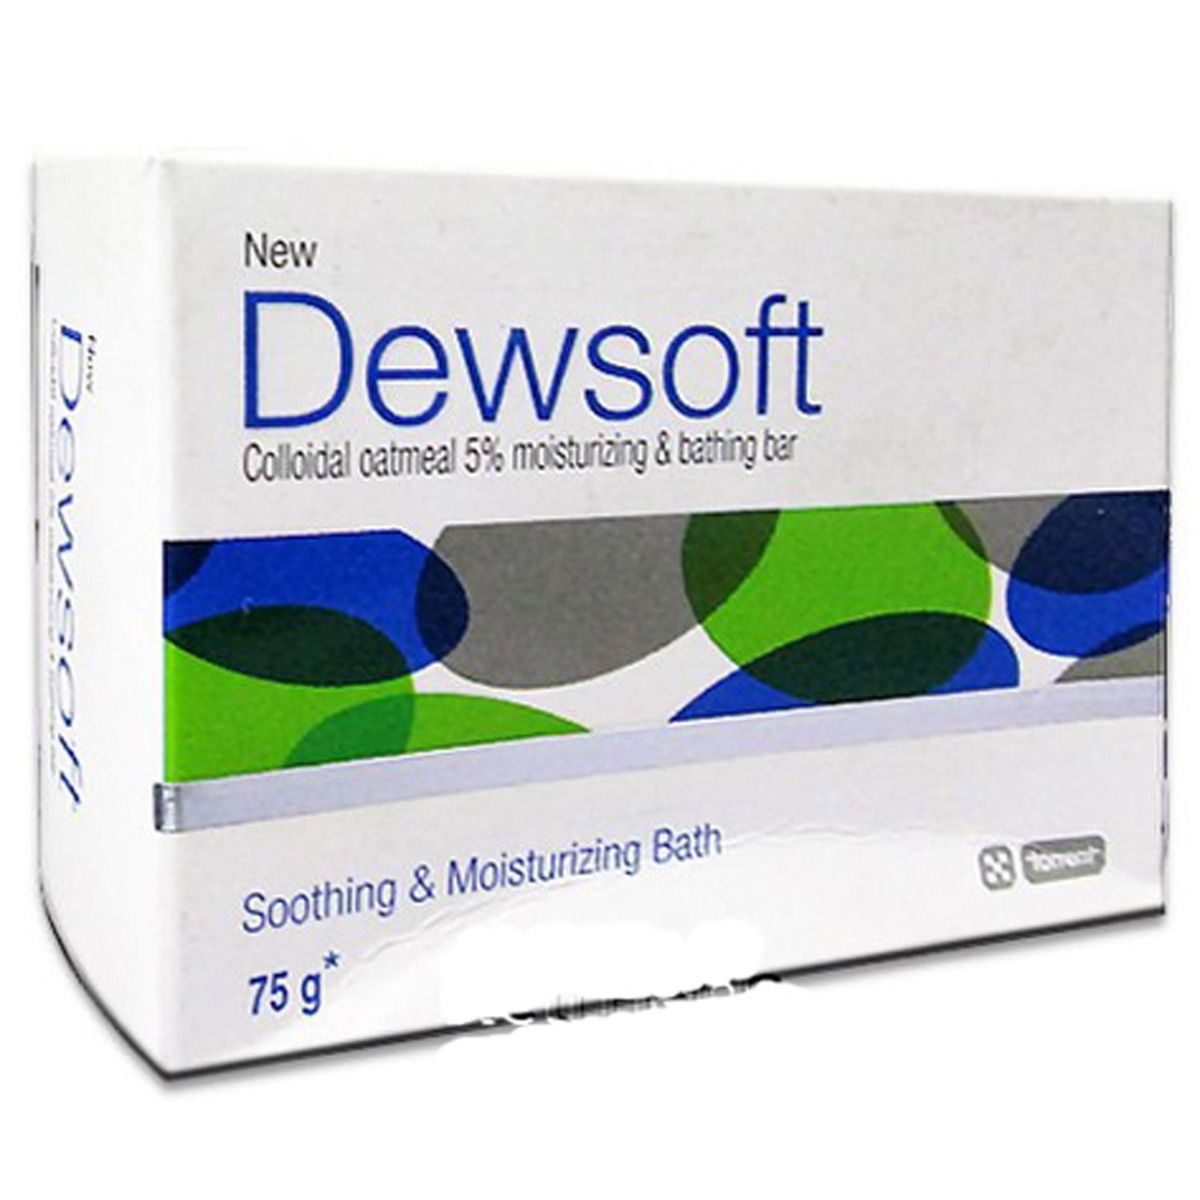 New Dewsoft Soap, 75 gm Price, Uses, Side Effects, Composition ...